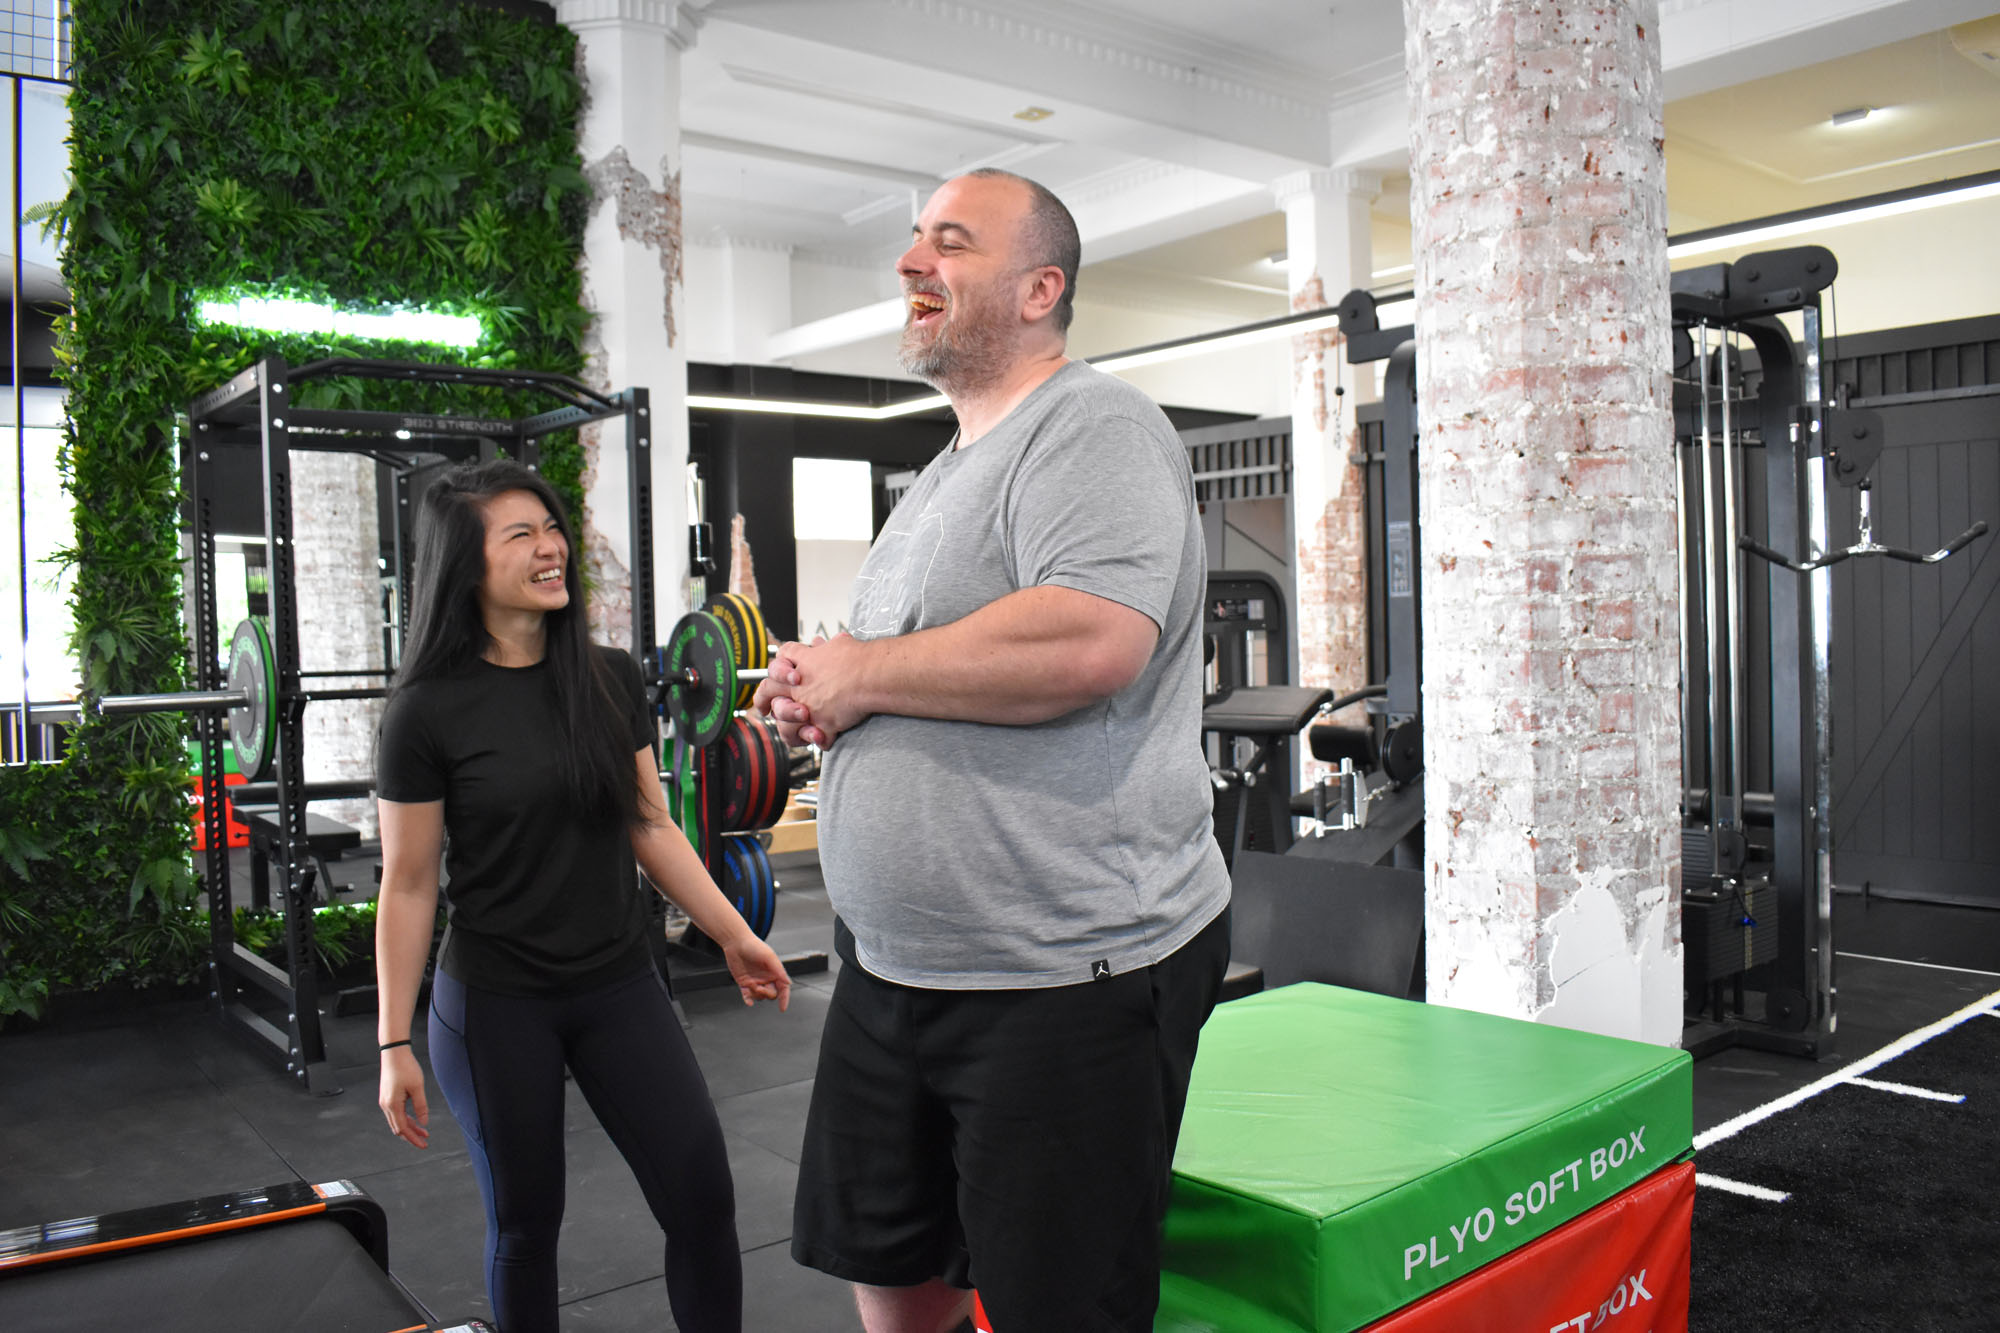 All our rehab classes are run by qualified physiotherapists who can tailor each exercise to your needs. Whether you are in it for fitness or rehab, we can find a class to suit you!